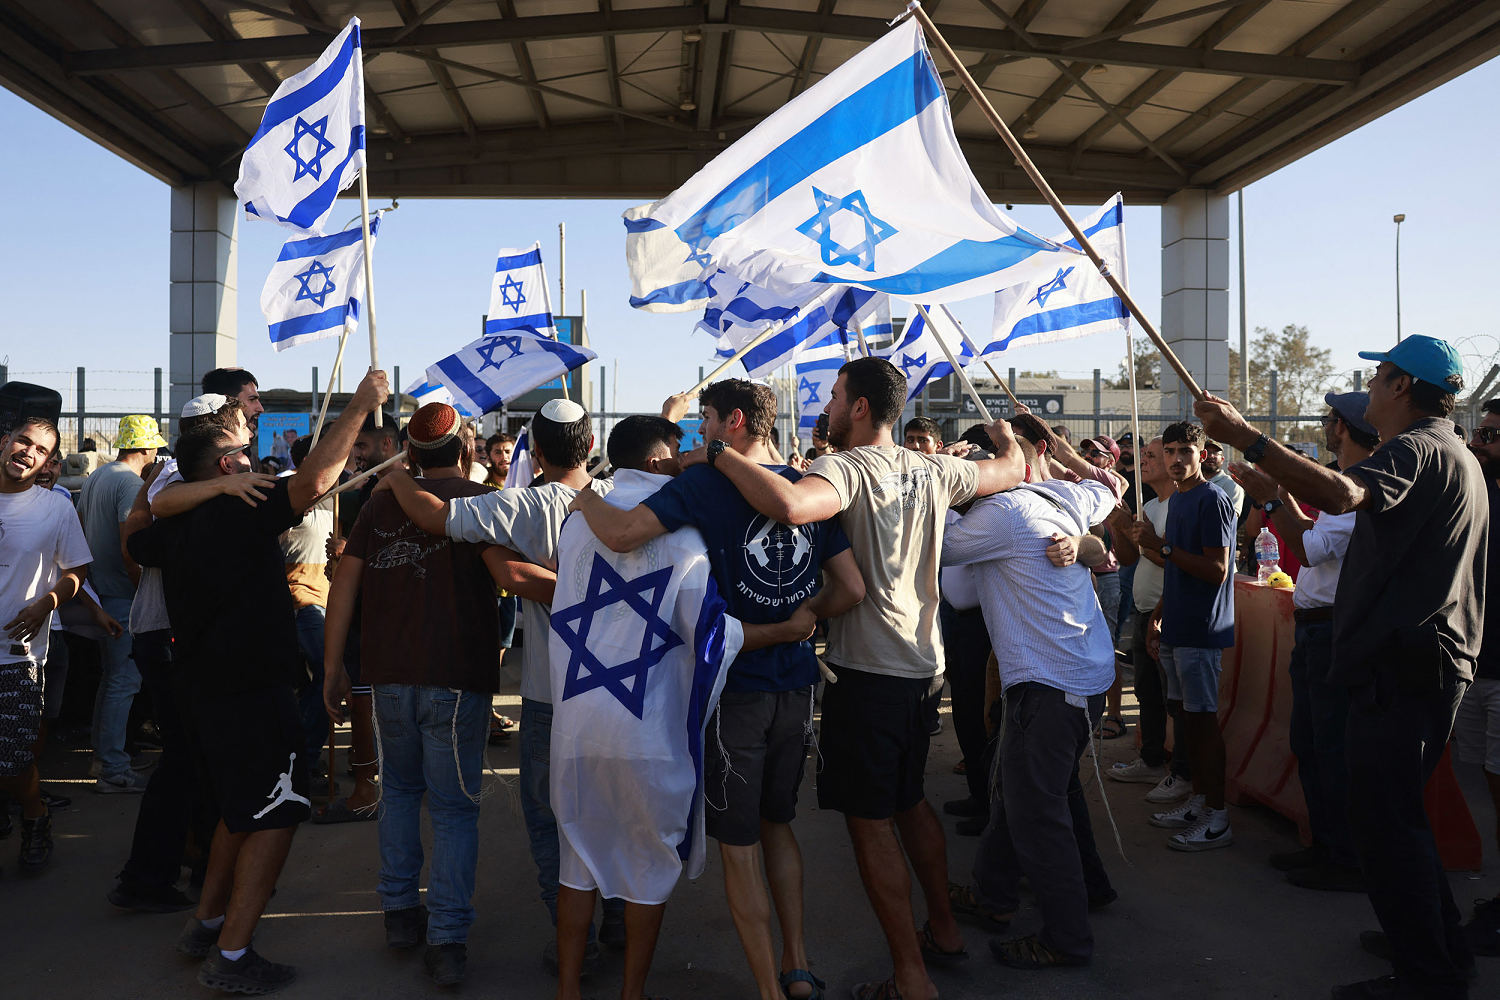 Israelis storm bases to protest detained soldiers after alleged abuse of Palestinian prisoners